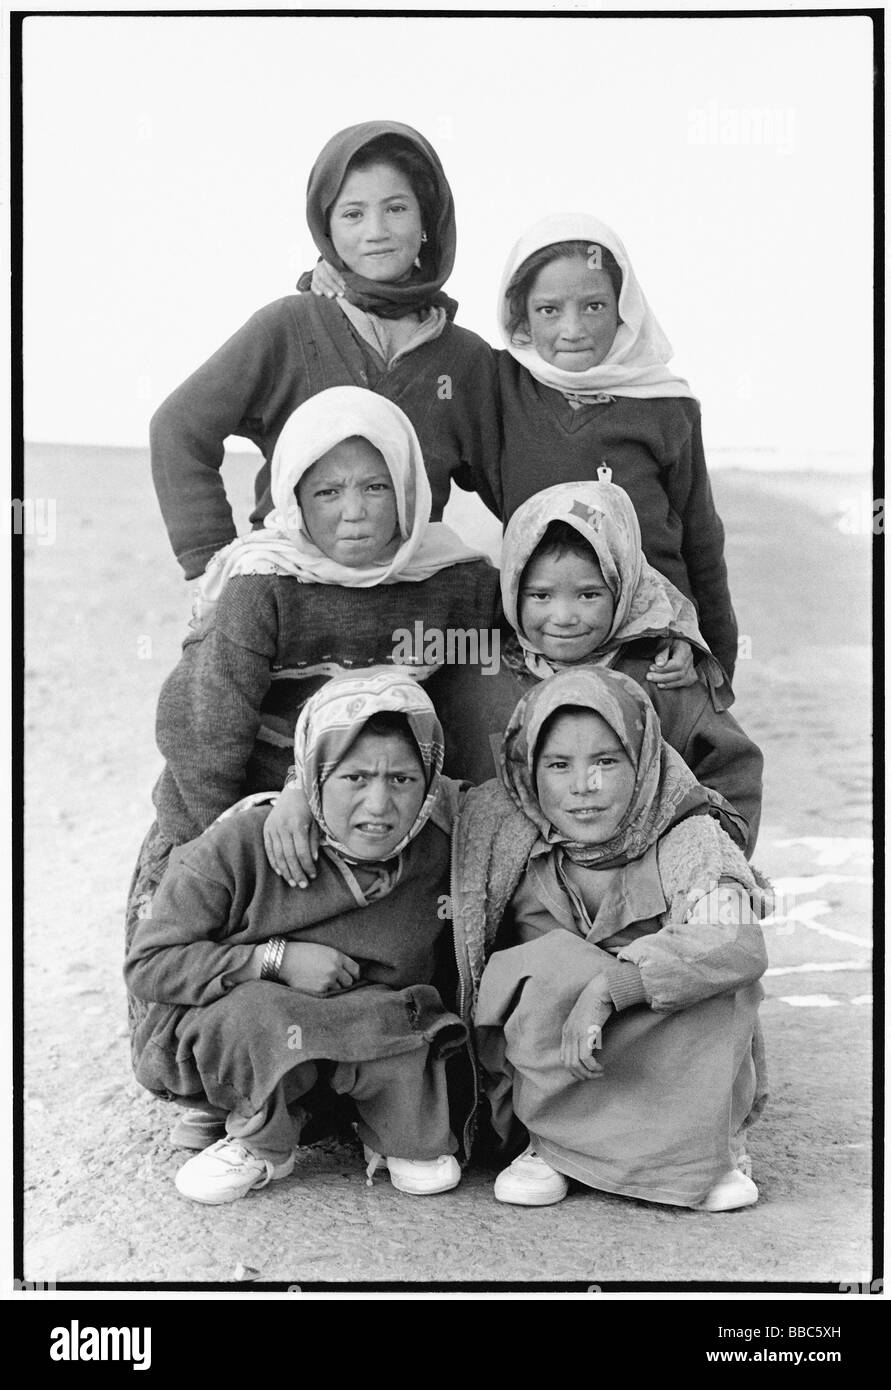 India, Ladakh, Portrait of young girls on their way home from school. Stock Photo